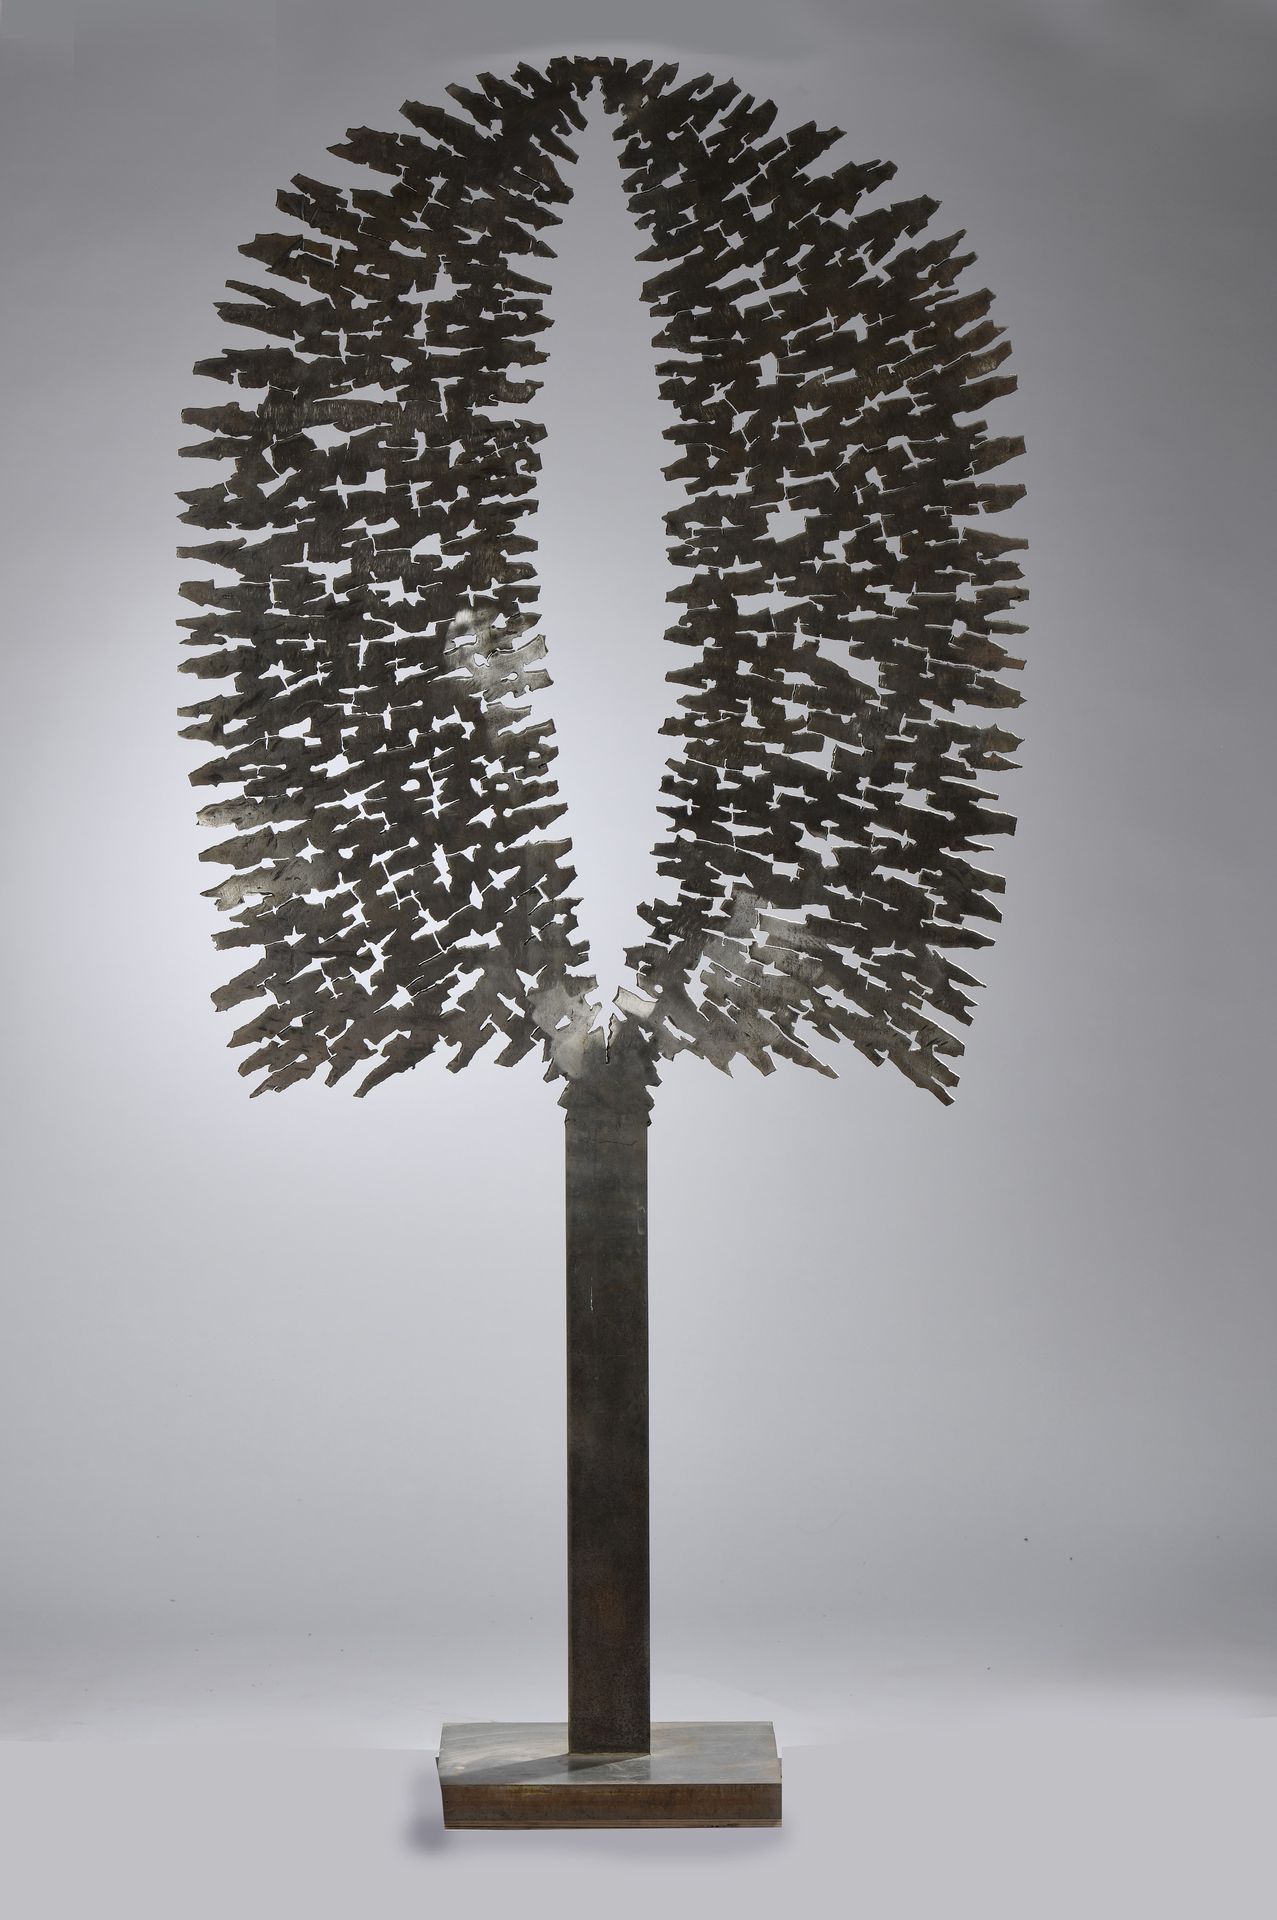 Null Michel RICO (born in 1946)
Tree of life 
Sculpture in cut and welded steel.&hellip;